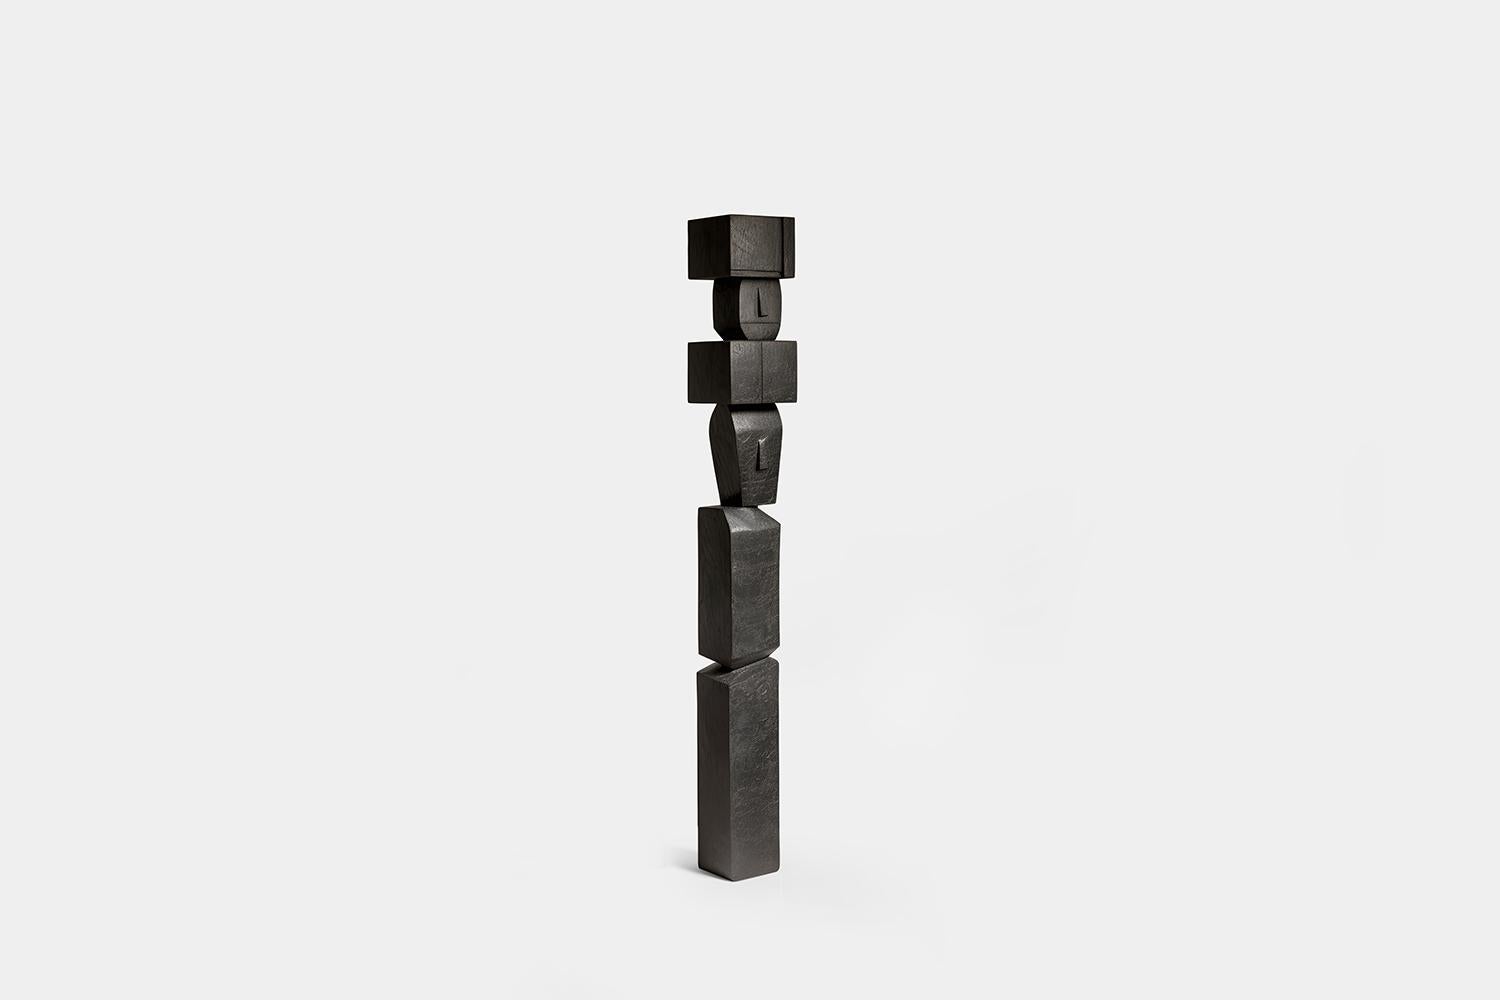 Monumental Wooden Sculpture Inspired in Constantin Brancusi Style, Unseen Force 26 by Joel Escalona


This monolithic sculpture, designed by the talented Artist Joel Escalona, is a towering example of beauty in craftsmanship. Hand and digital